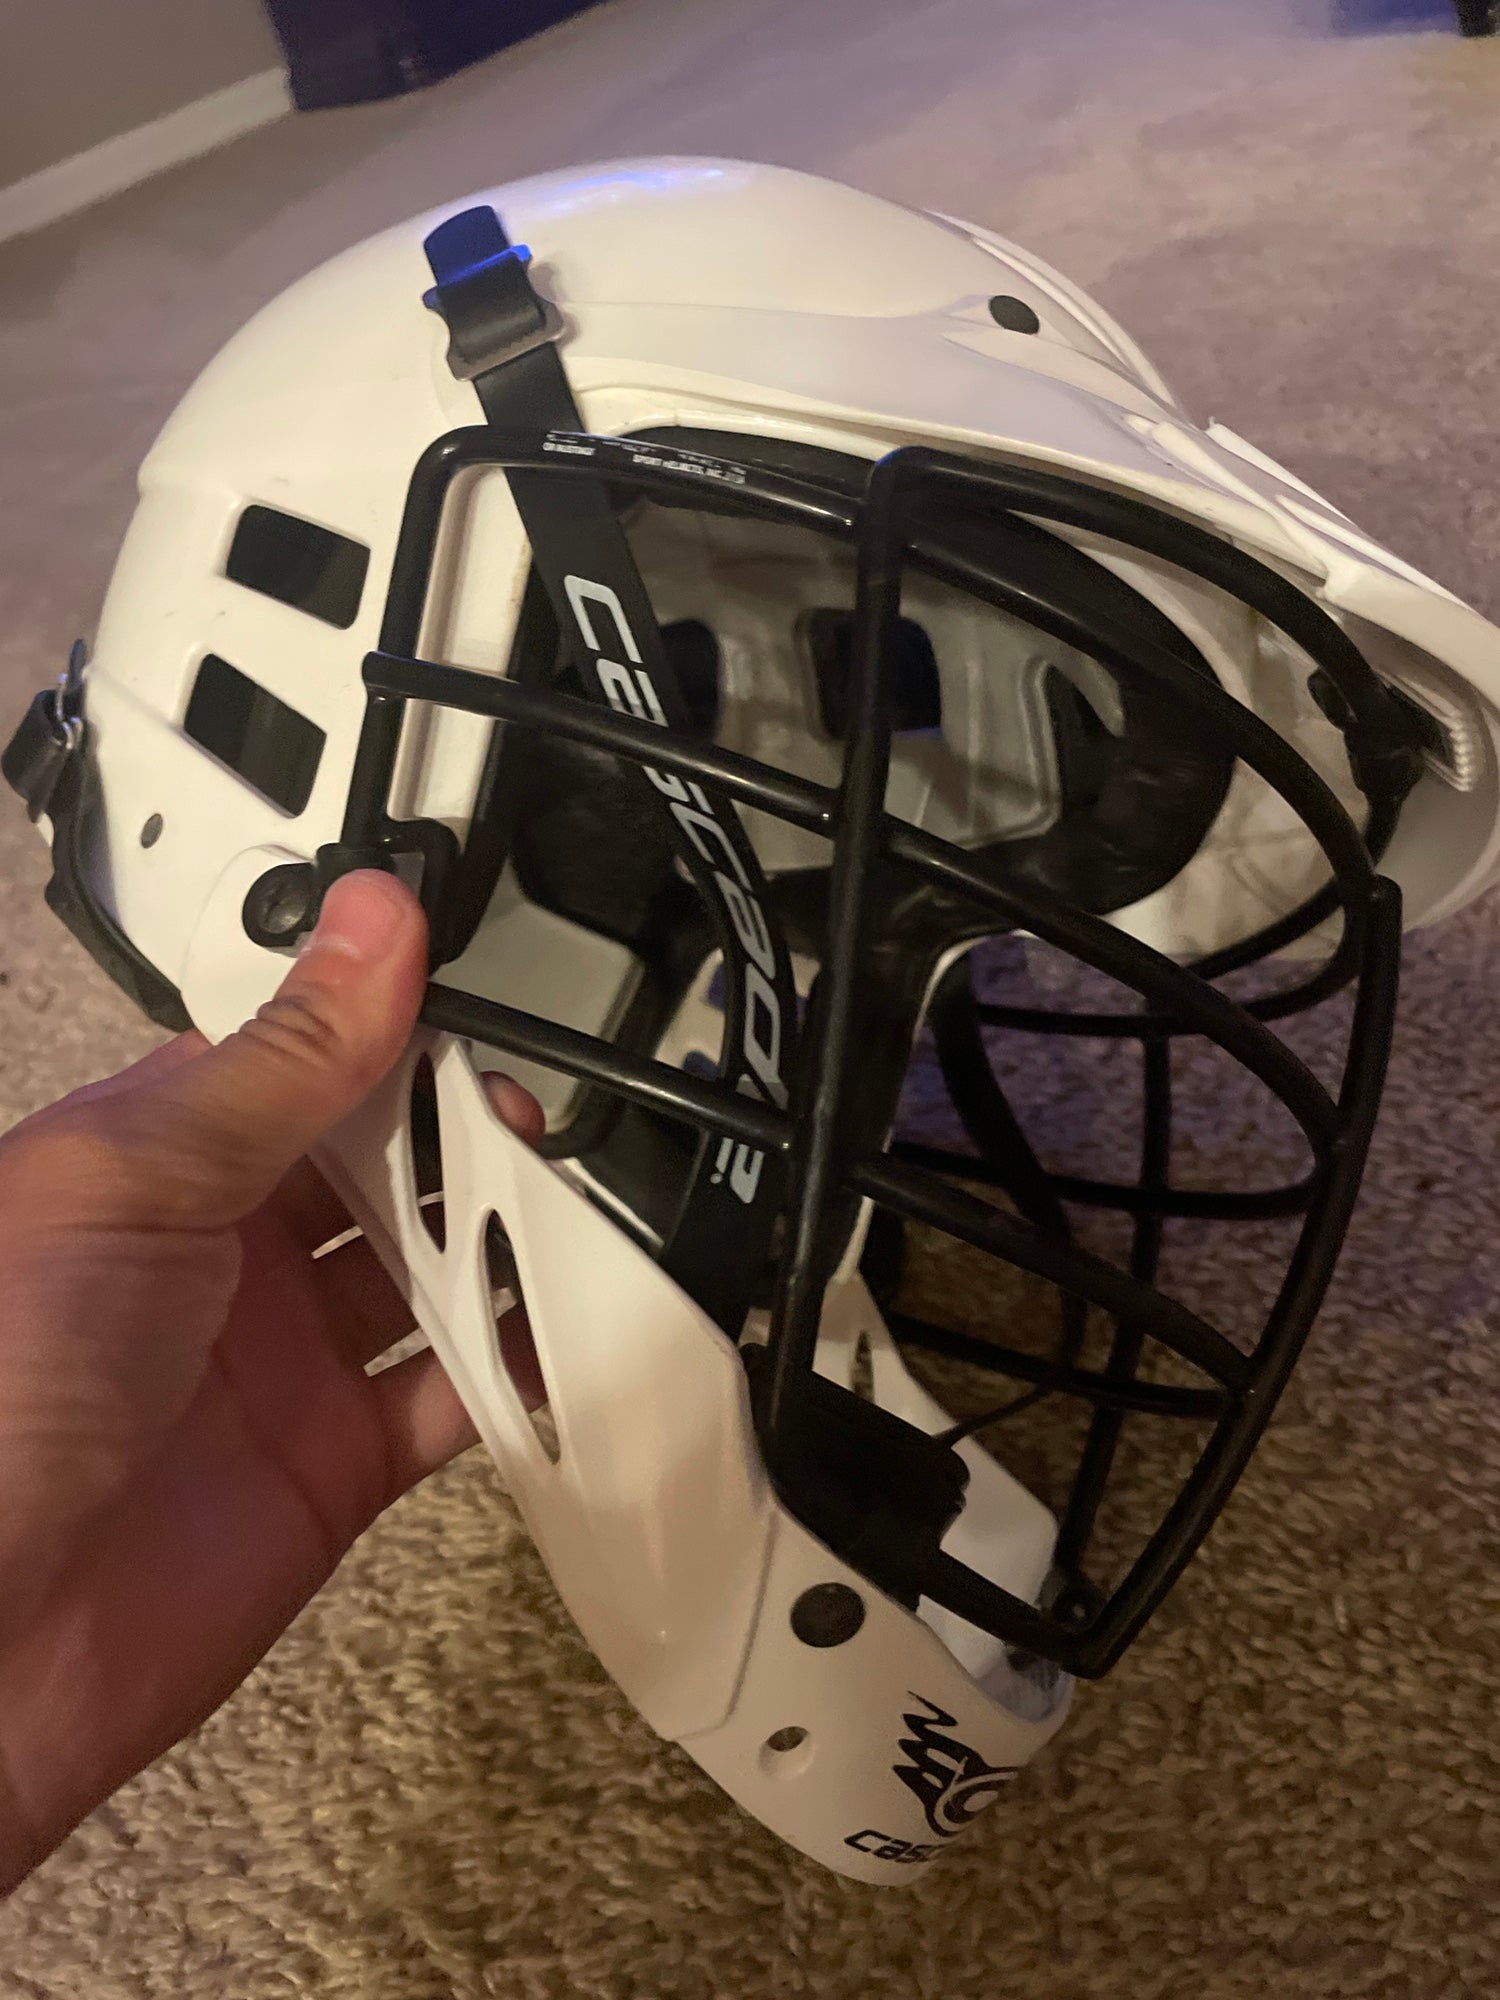 Details about   CASCADE CS ADJUSTABLE LACROSSE LAX HELMET WITH CHIN STRAP YOUTH WHITE OSFM   12 